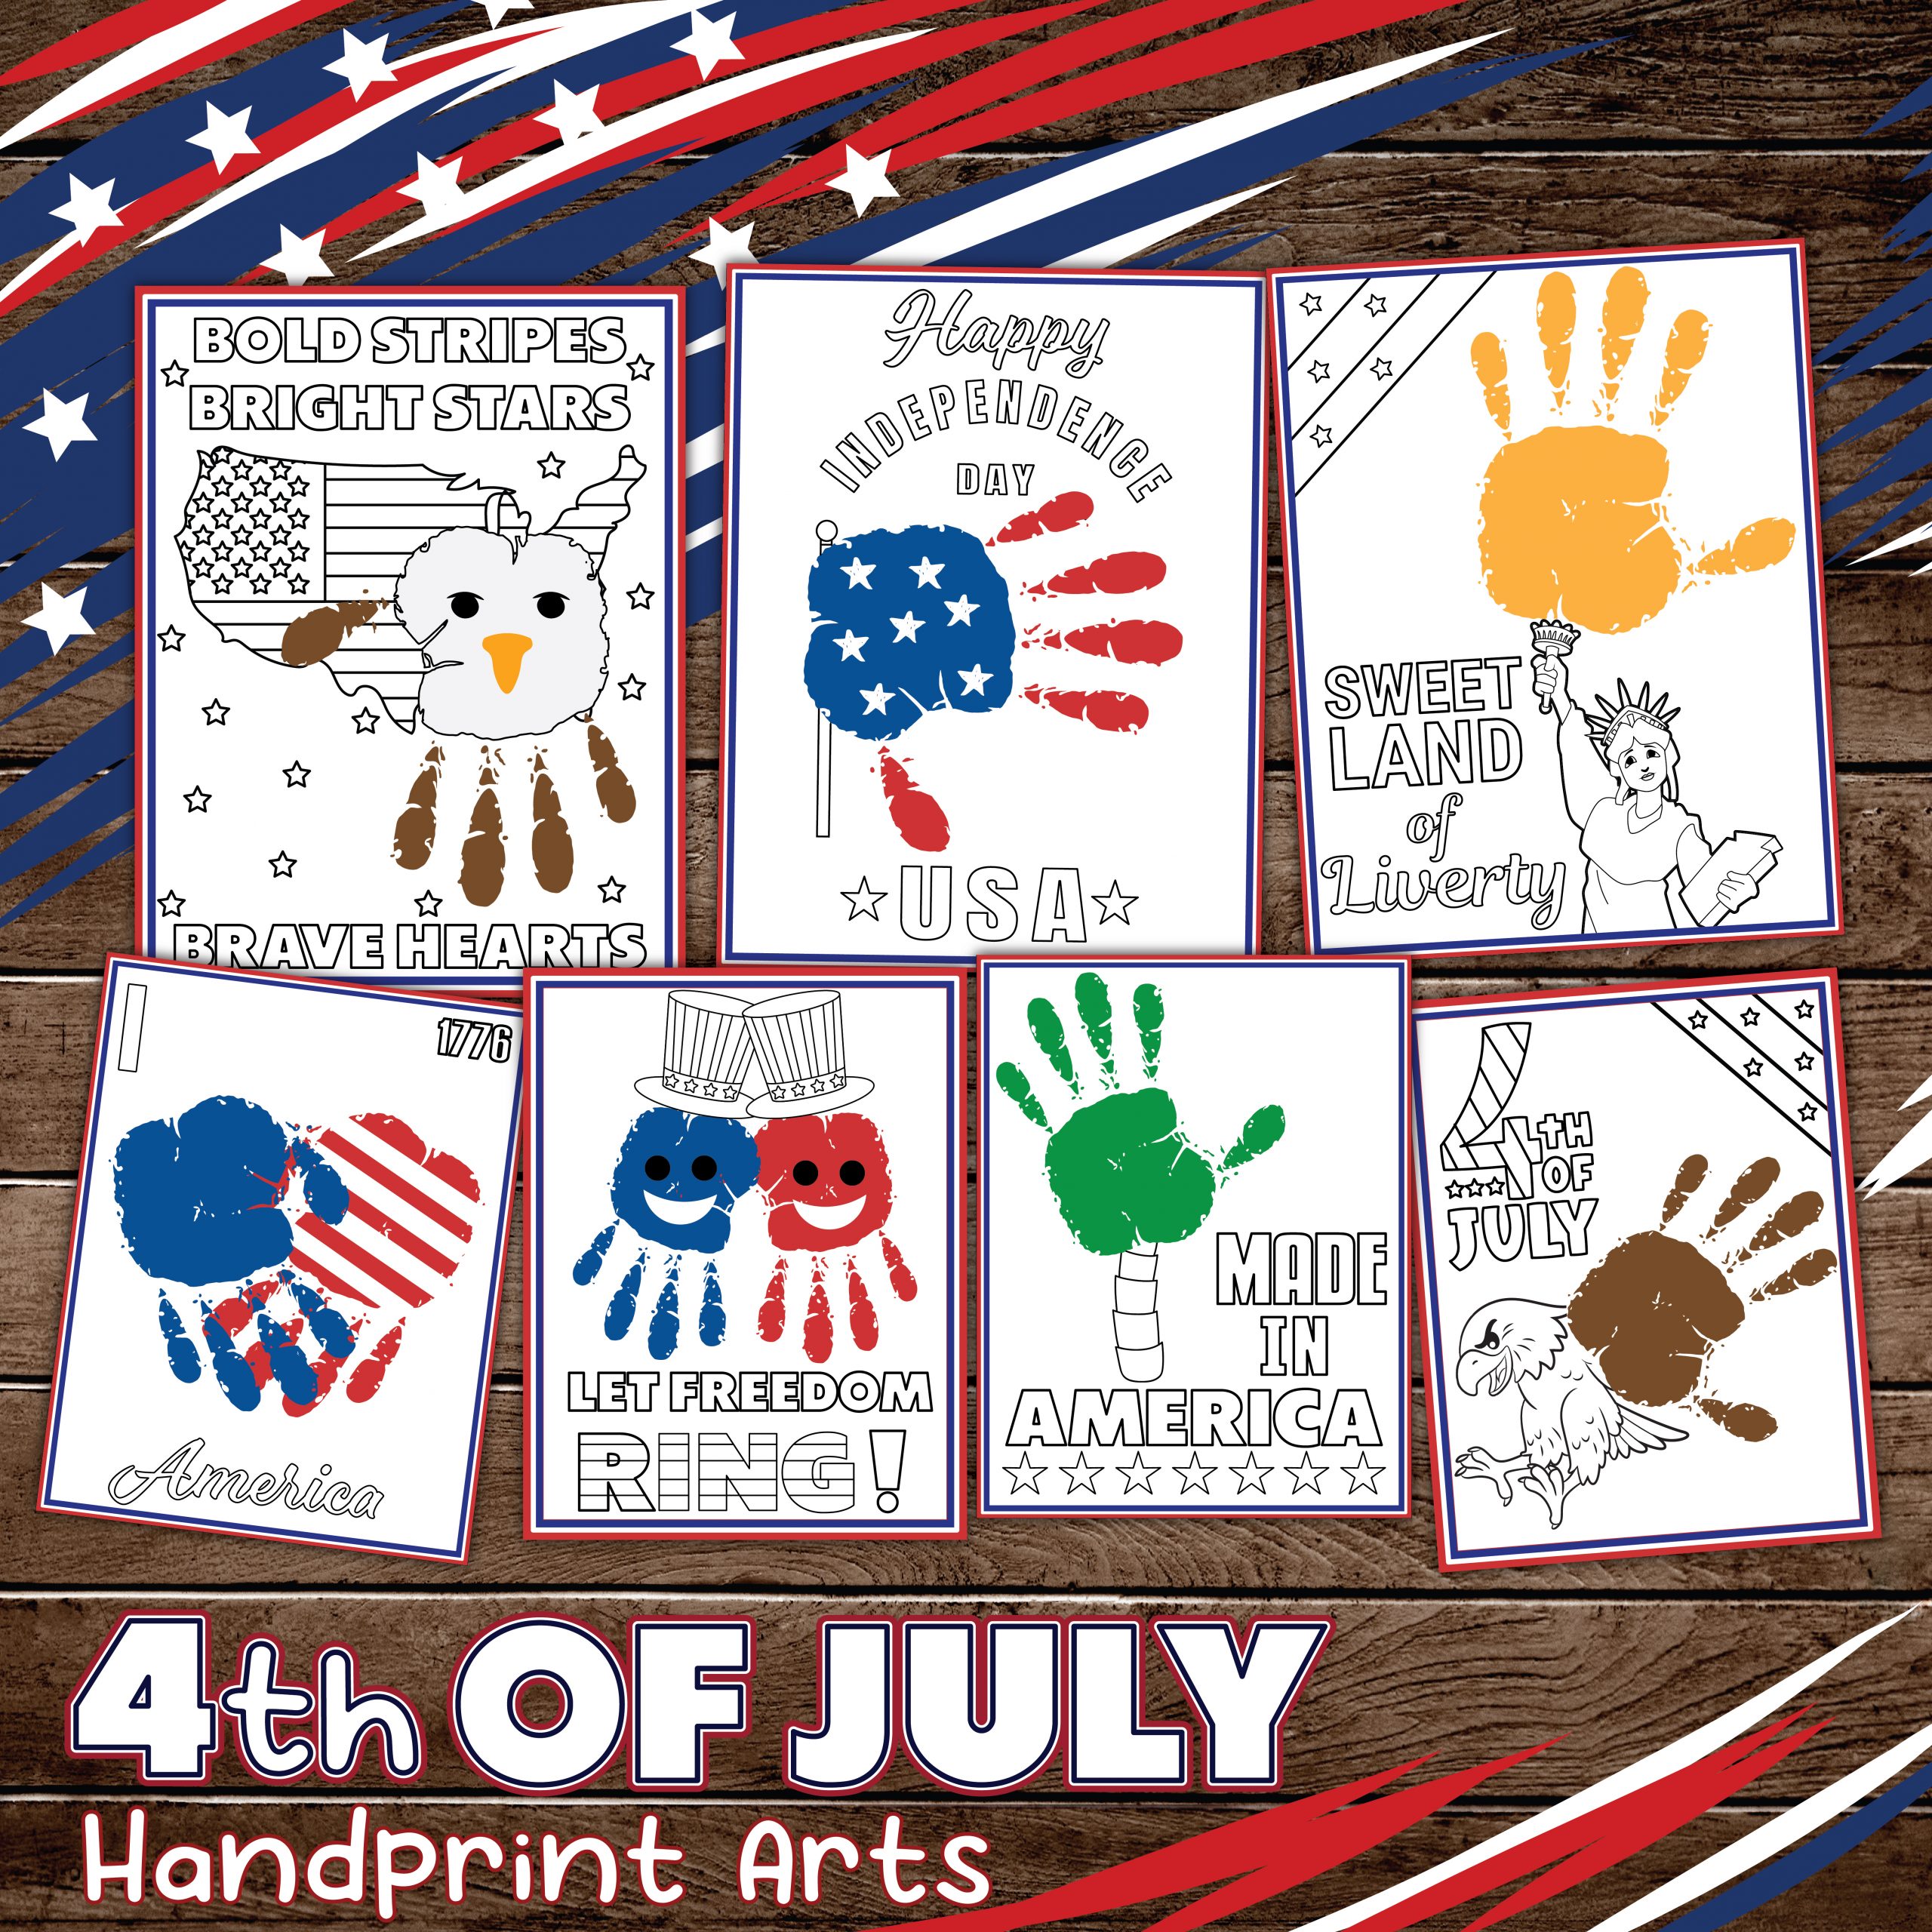 Hand Print Art for Kids to Celebrate July the 4th